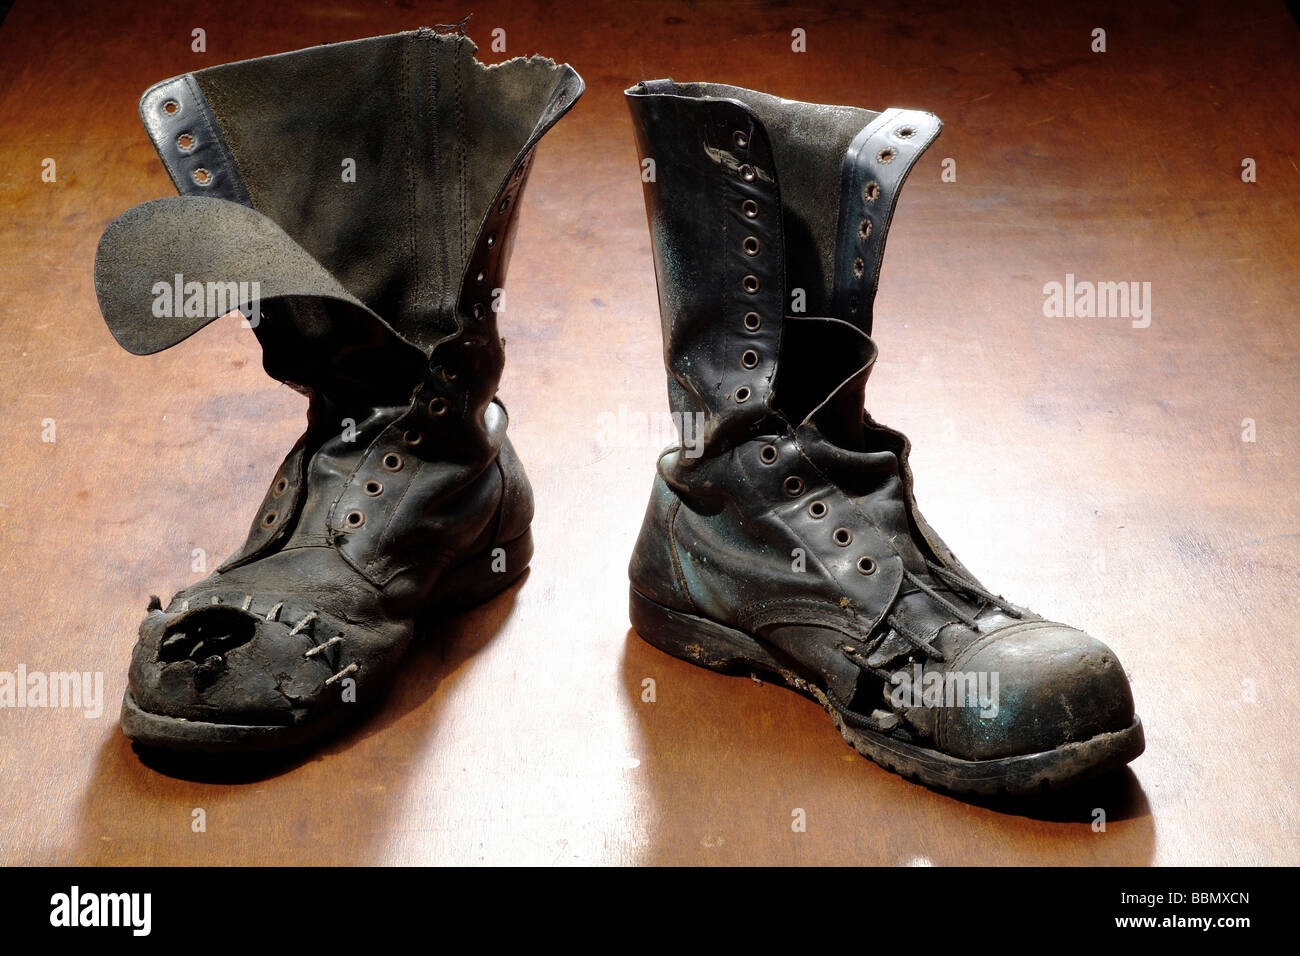 A pair of worn out combat boots Stock Photo